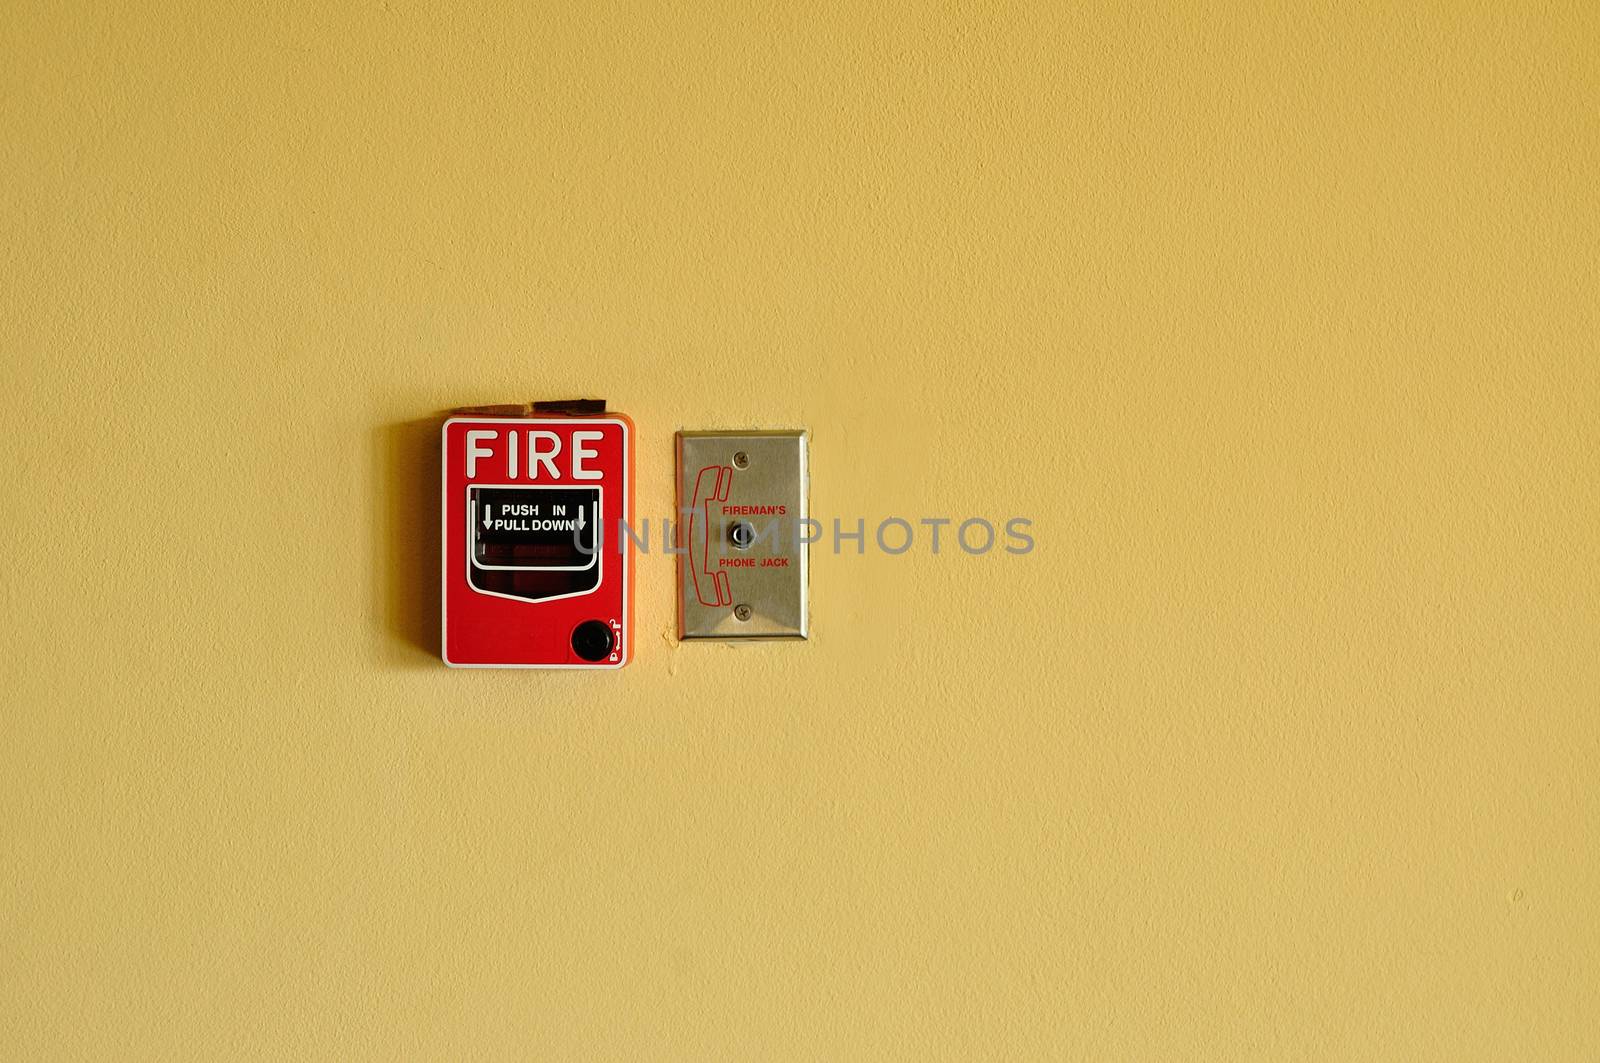 Fire Alarm switch by thampapon